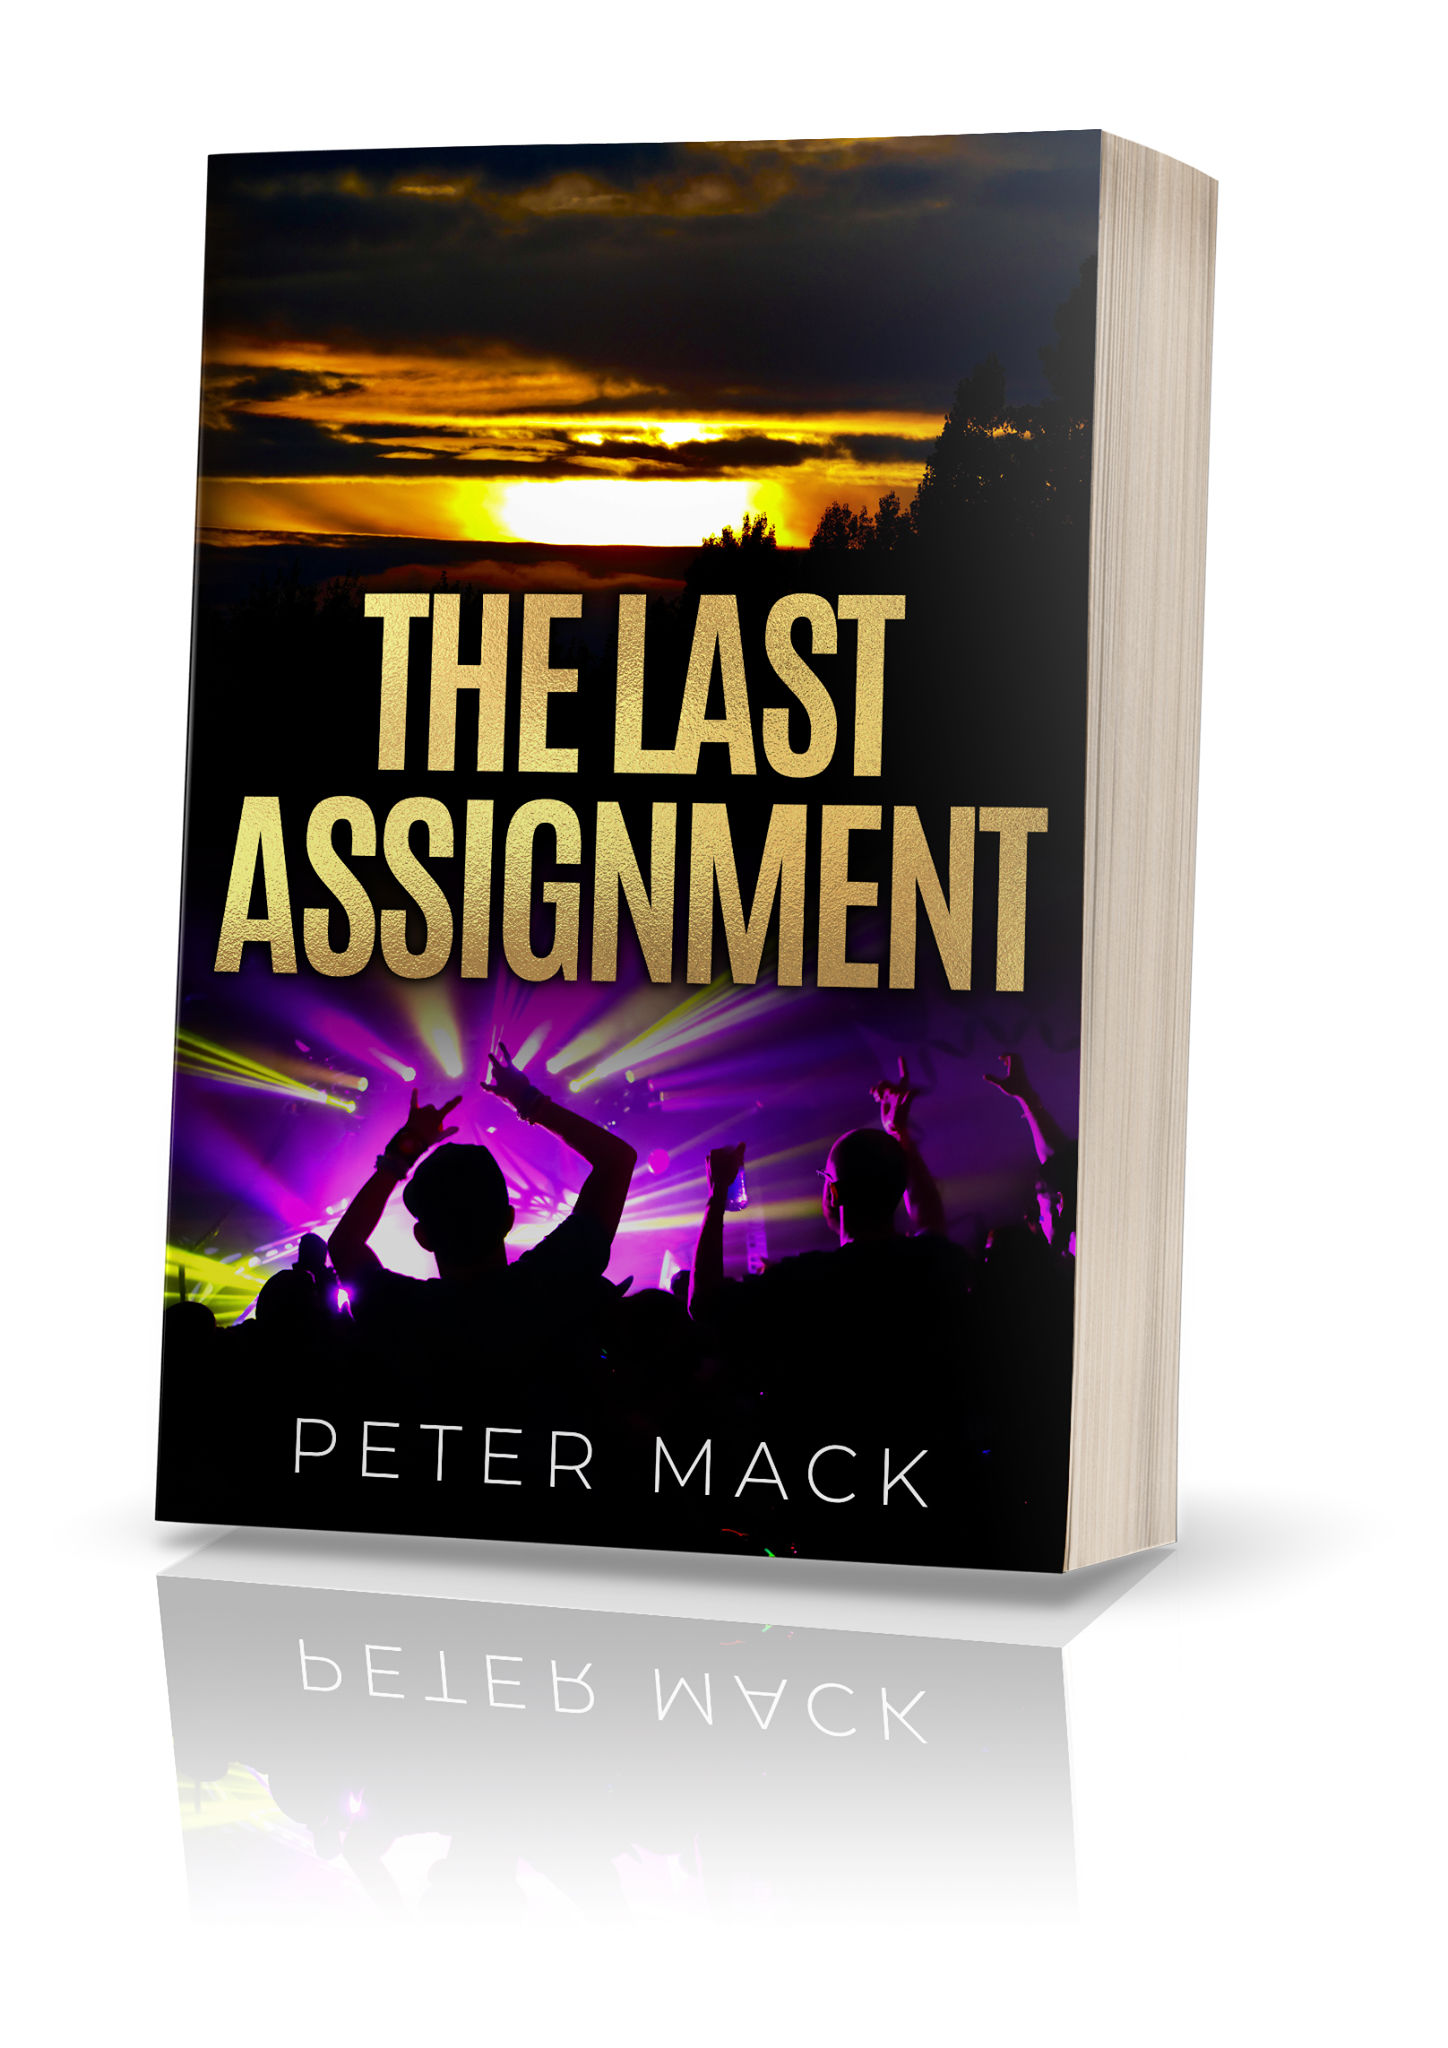 THE LAST ASSIGNMENT